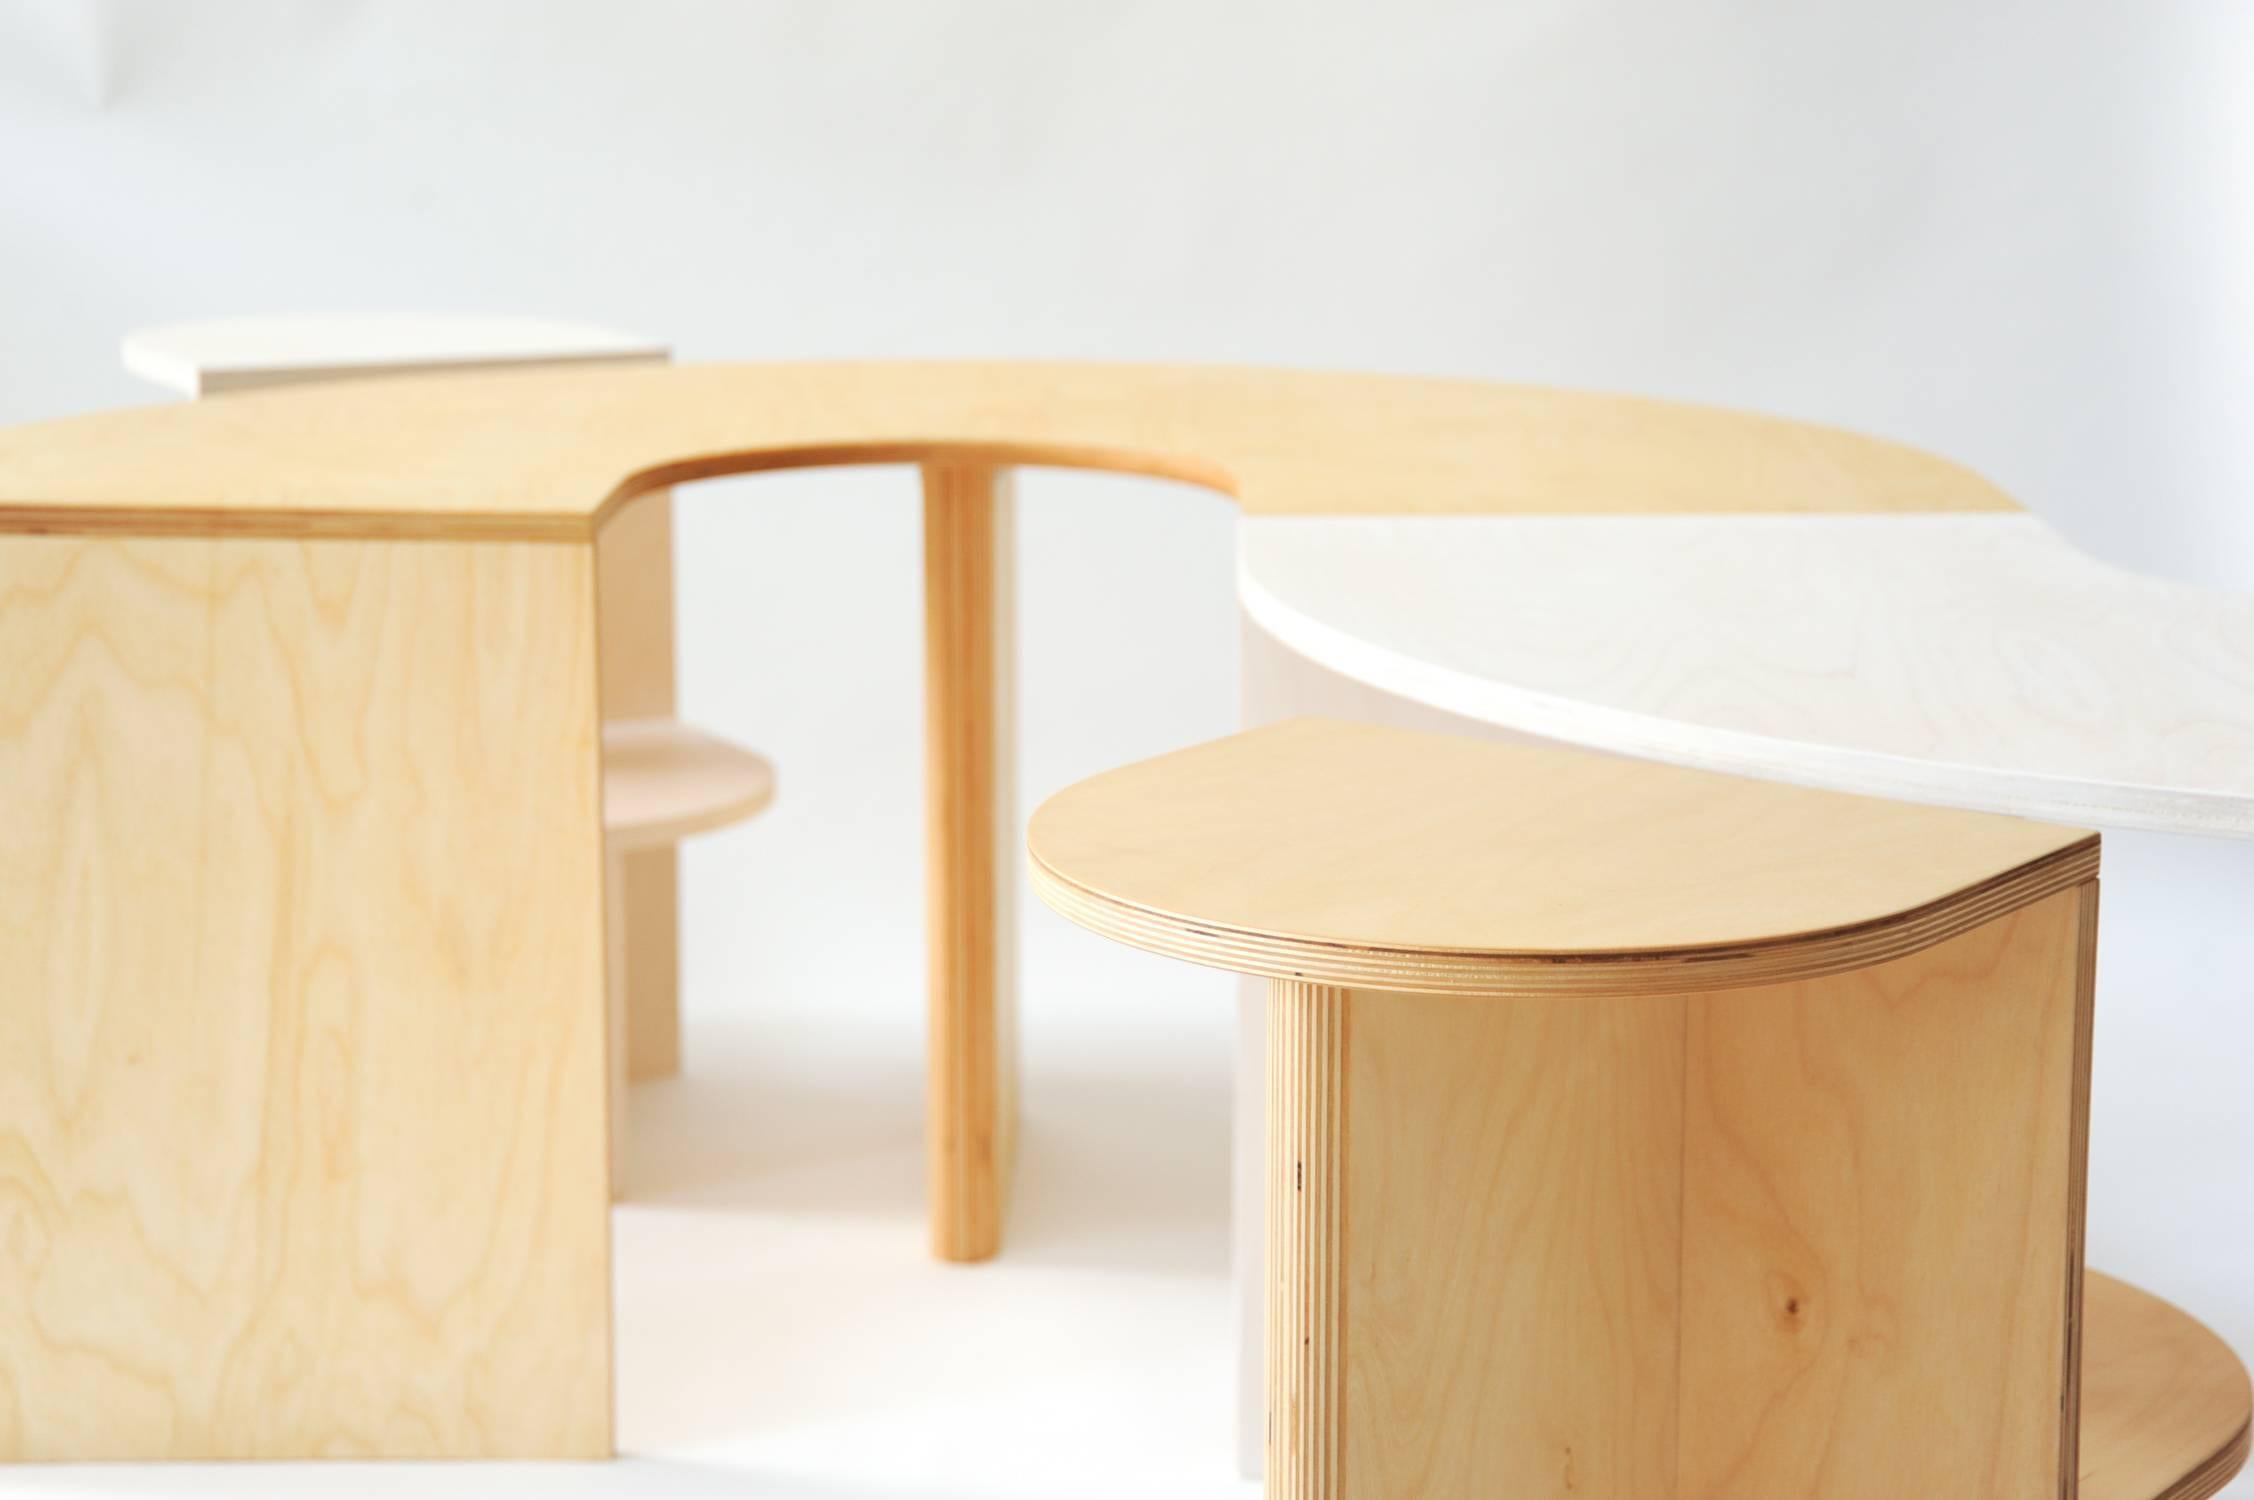 Lunar Table by Kinder Modern in Birch Plywood, USA, 2017 In Excellent Condition For Sale In New York, NY